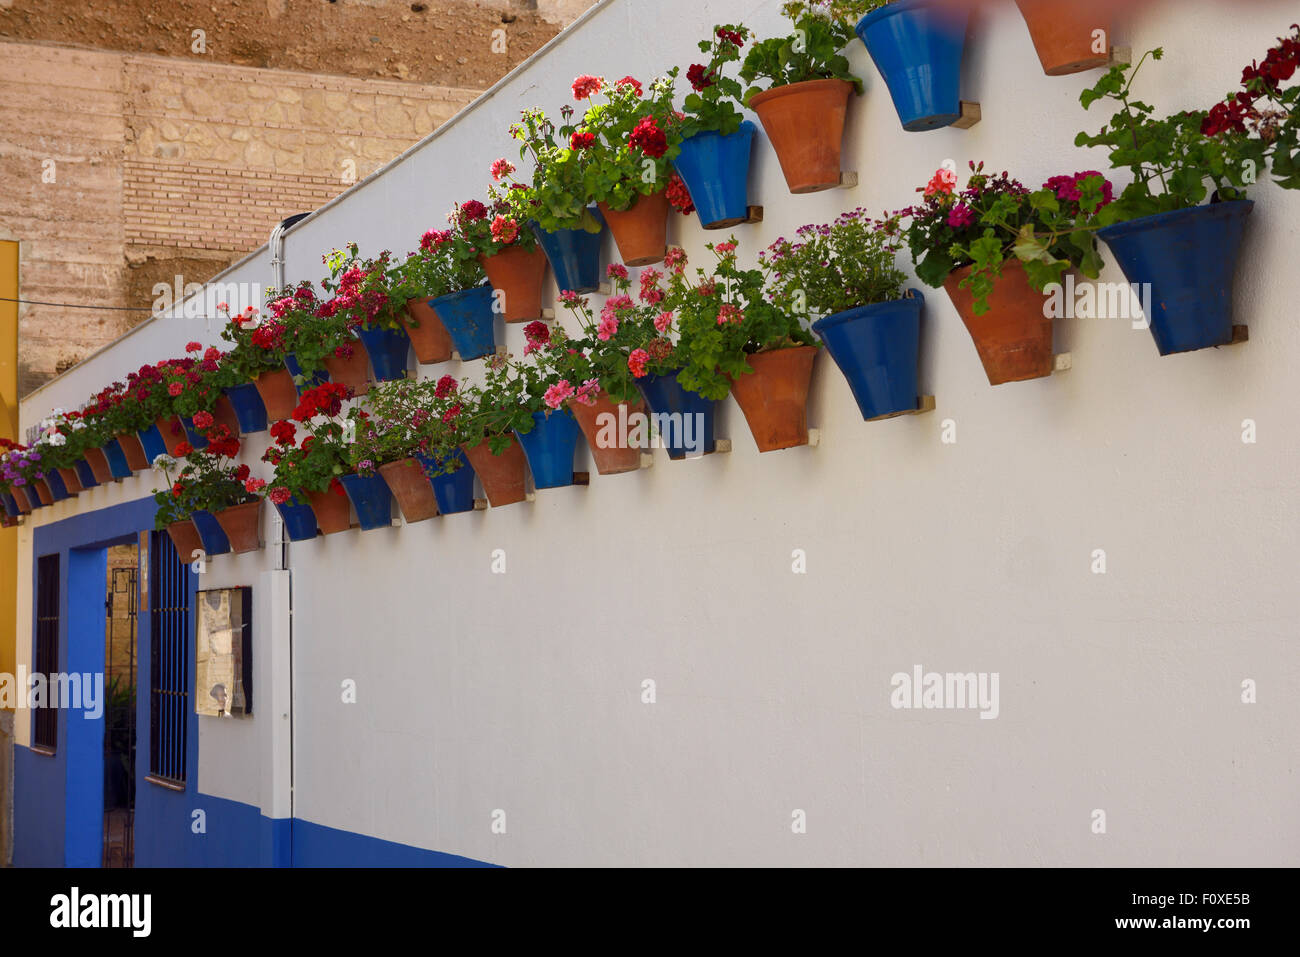 Potted geranium flowers along white stucco wall on the route of Patios of Alcazar Viejo Cordoba Stock Photo